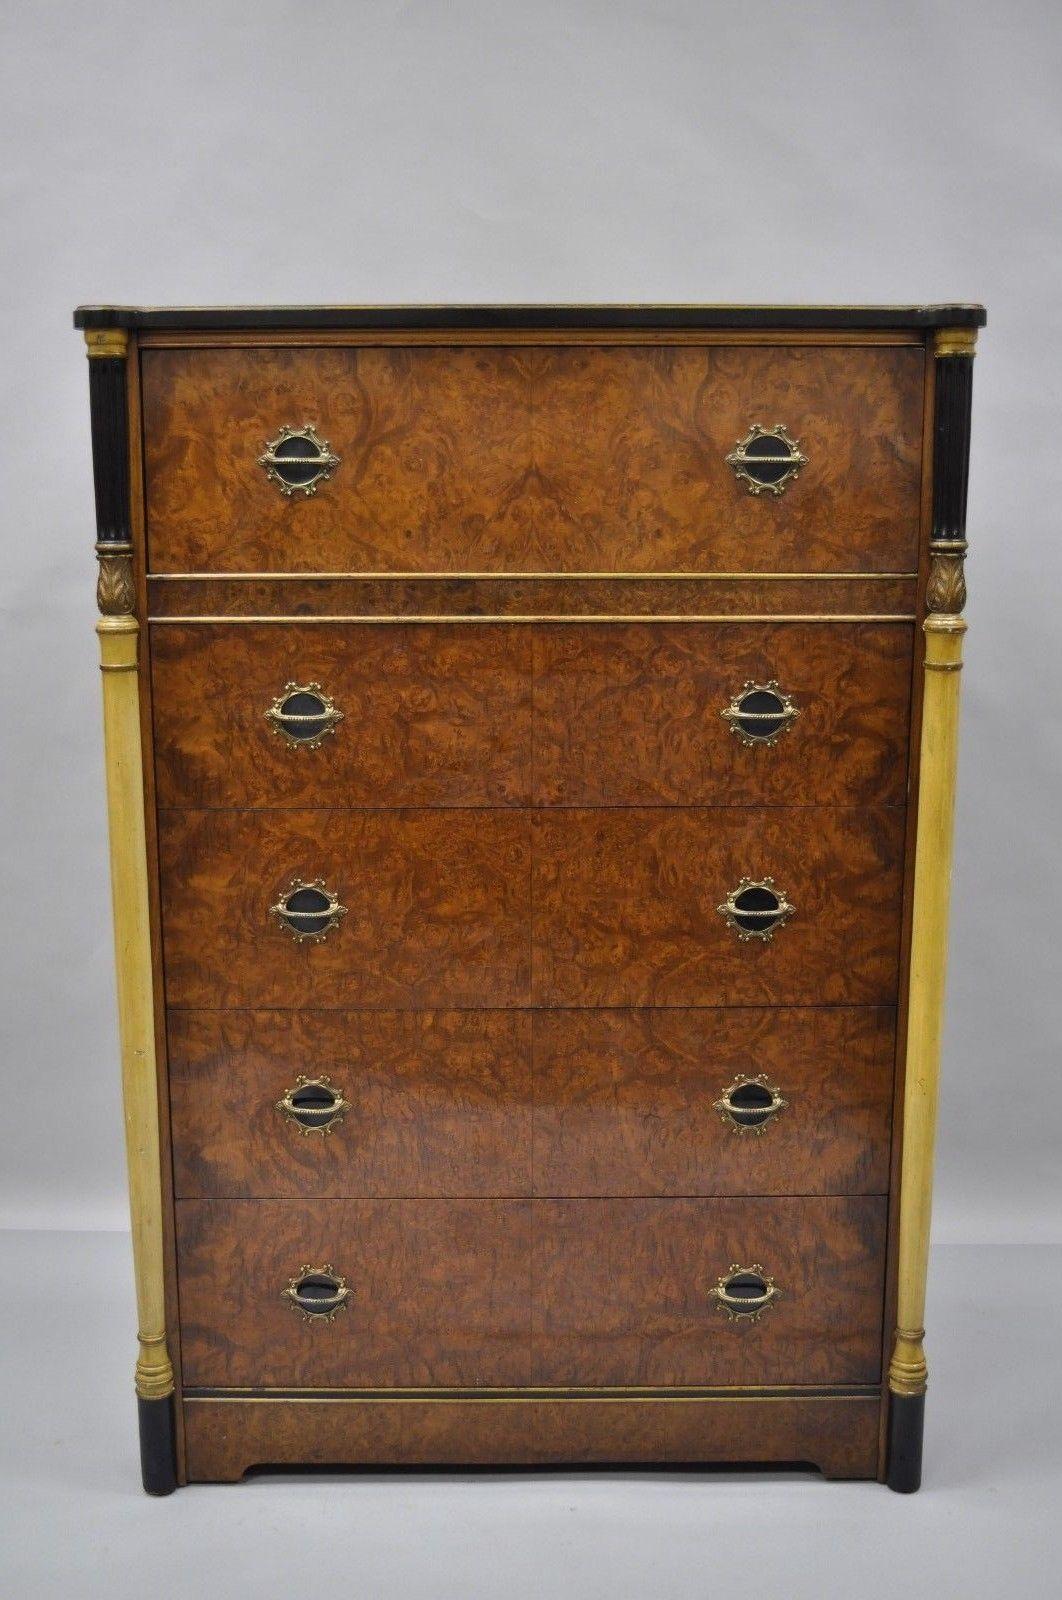 Antique French Art Deco / Empire burl wood tall chest. Item features five dovetailed drawers, black and yellow columns, ornate brass pulls, and beautiful wood grain throughout, early 1900s. Measurements: 52